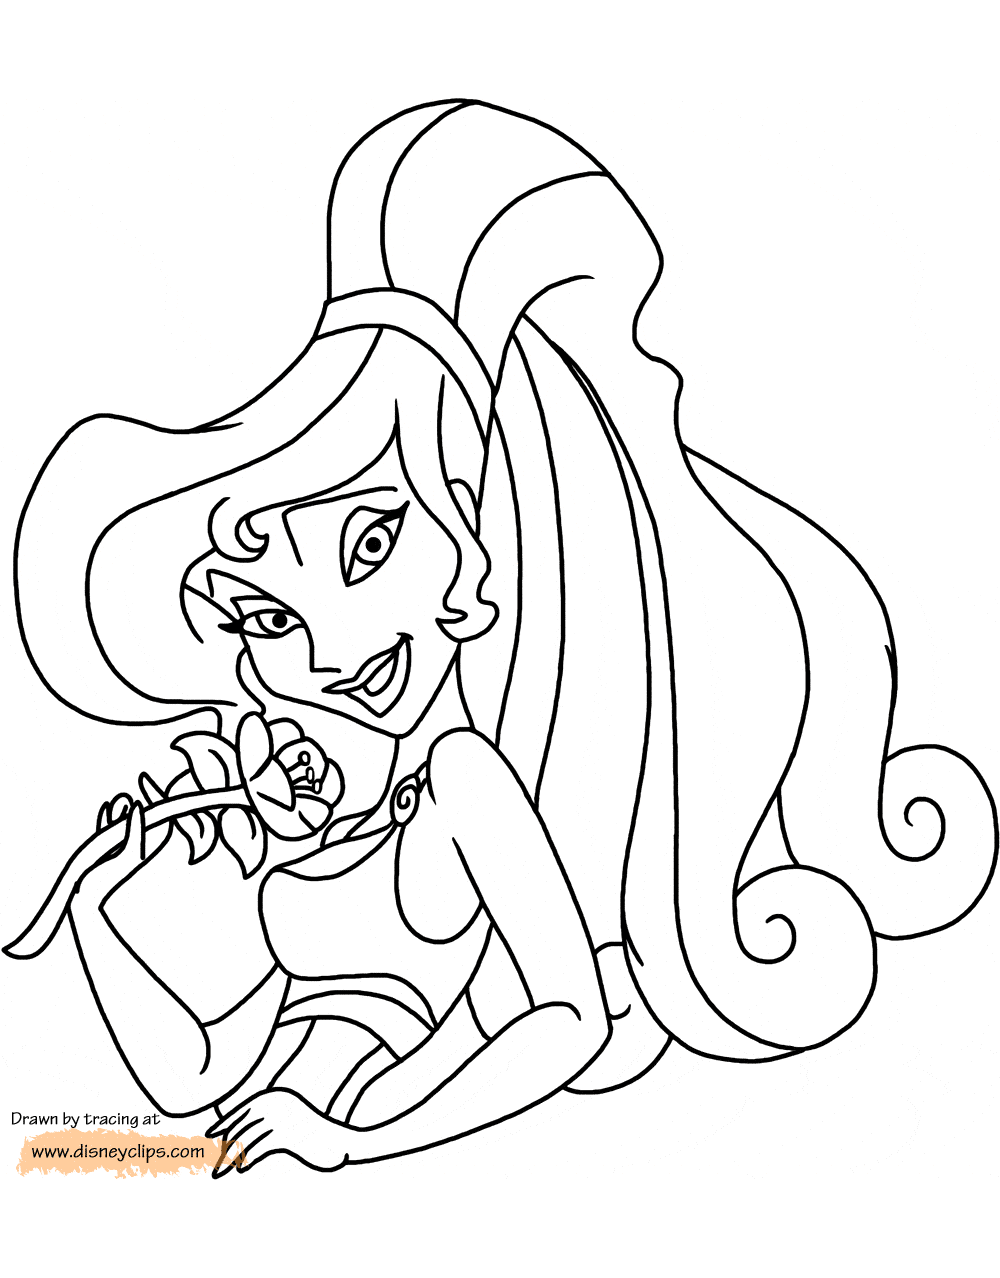 Download Hercules Coloring Pages | Disneyclips.com